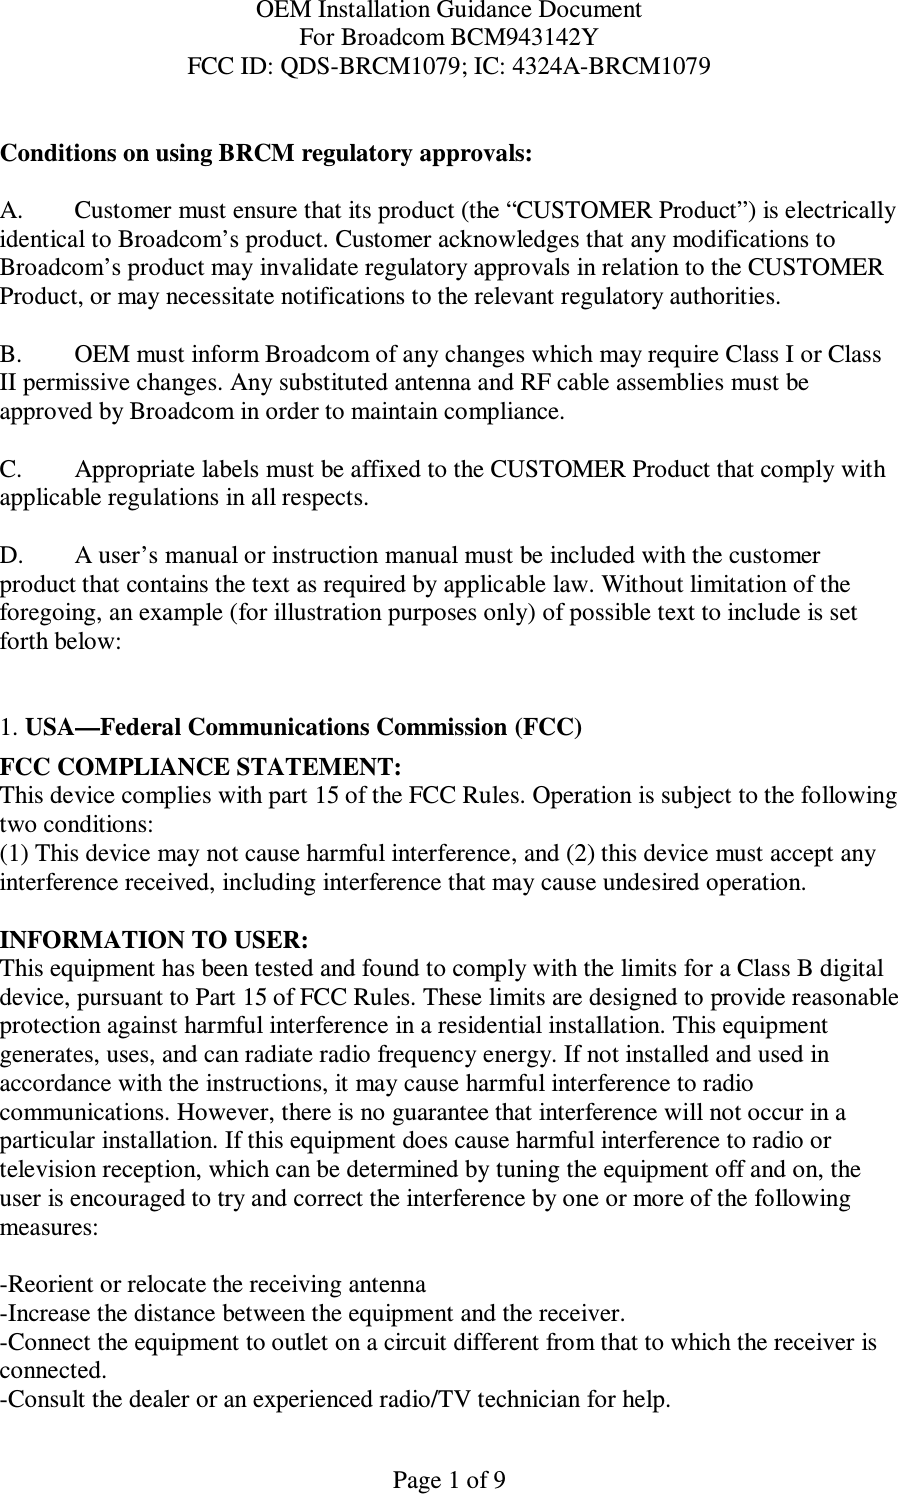 OEM Installation Guidance Document For Broadcom BCM943142Y FCC ID: QDS-BRCM1079; IC: 4324A-BRCM1079  Page 1 of 9  Conditions on using BRCM regulatory approvals:   A.  Customer must ensure that its product (the “CUSTOMER Product”) is electrically identical to Broadcom’s product. Customer acknowledges that any modifications to Broadcom’s product may invalidate regulatory approvals in relation to the CUSTOMER Product, or may necessitate notifications to the relevant regulatory authorities.   B.   OEM must inform Broadcom of any changes which may require Class I or Class II permissive changes. Any substituted antenna and RF cable assemblies must be approved by Broadcom in order to maintain compliance.  C.  Appropriate labels must be affixed to the CUSTOMER Product that comply with  applicable regulations in all respects.    D.   A user’s manual or instruction manual must be included with the customer product that contains the text as required by applicable law. Without limitation of the foregoing, an example (for illustration purposes only) of possible text to include is set forth below:    1. USA—Federal Communications Commission (FCC) FCC COMPLIANCE STATEMENT: This device complies with part 15 of the FCC Rules. Operation is subject to the following two conditions: (1) This device may not cause harmful interference, and (2) this device must accept any interference received, including interference that may cause undesired operation.  INFORMATION TO USER: This equipment has been tested and found to comply with the limits for a Class B digital device, pursuant to Part 15 of FCC Rules. These limits are designed to provide reasonable protection against harmful interference in a residential installation. This equipment generates, uses, and can radiate radio frequency energy. If not installed and used in accordance with the instructions, it may cause harmful interference to radio communications. However, there is no guarantee that interference will not occur in a particular installation. If this equipment does cause harmful interference to radio or television reception, which can be determined by tuning the equipment off and on, the user is encouraged to try and correct the interference by one or more of the following measures:    -Reorient or relocate the receiving antenna -Increase the distance between the equipment and the receiver. -Connect the equipment to outlet on a circuit different from that to which the receiver is connected. -Consult the dealer or an experienced radio/TV technician for help. 